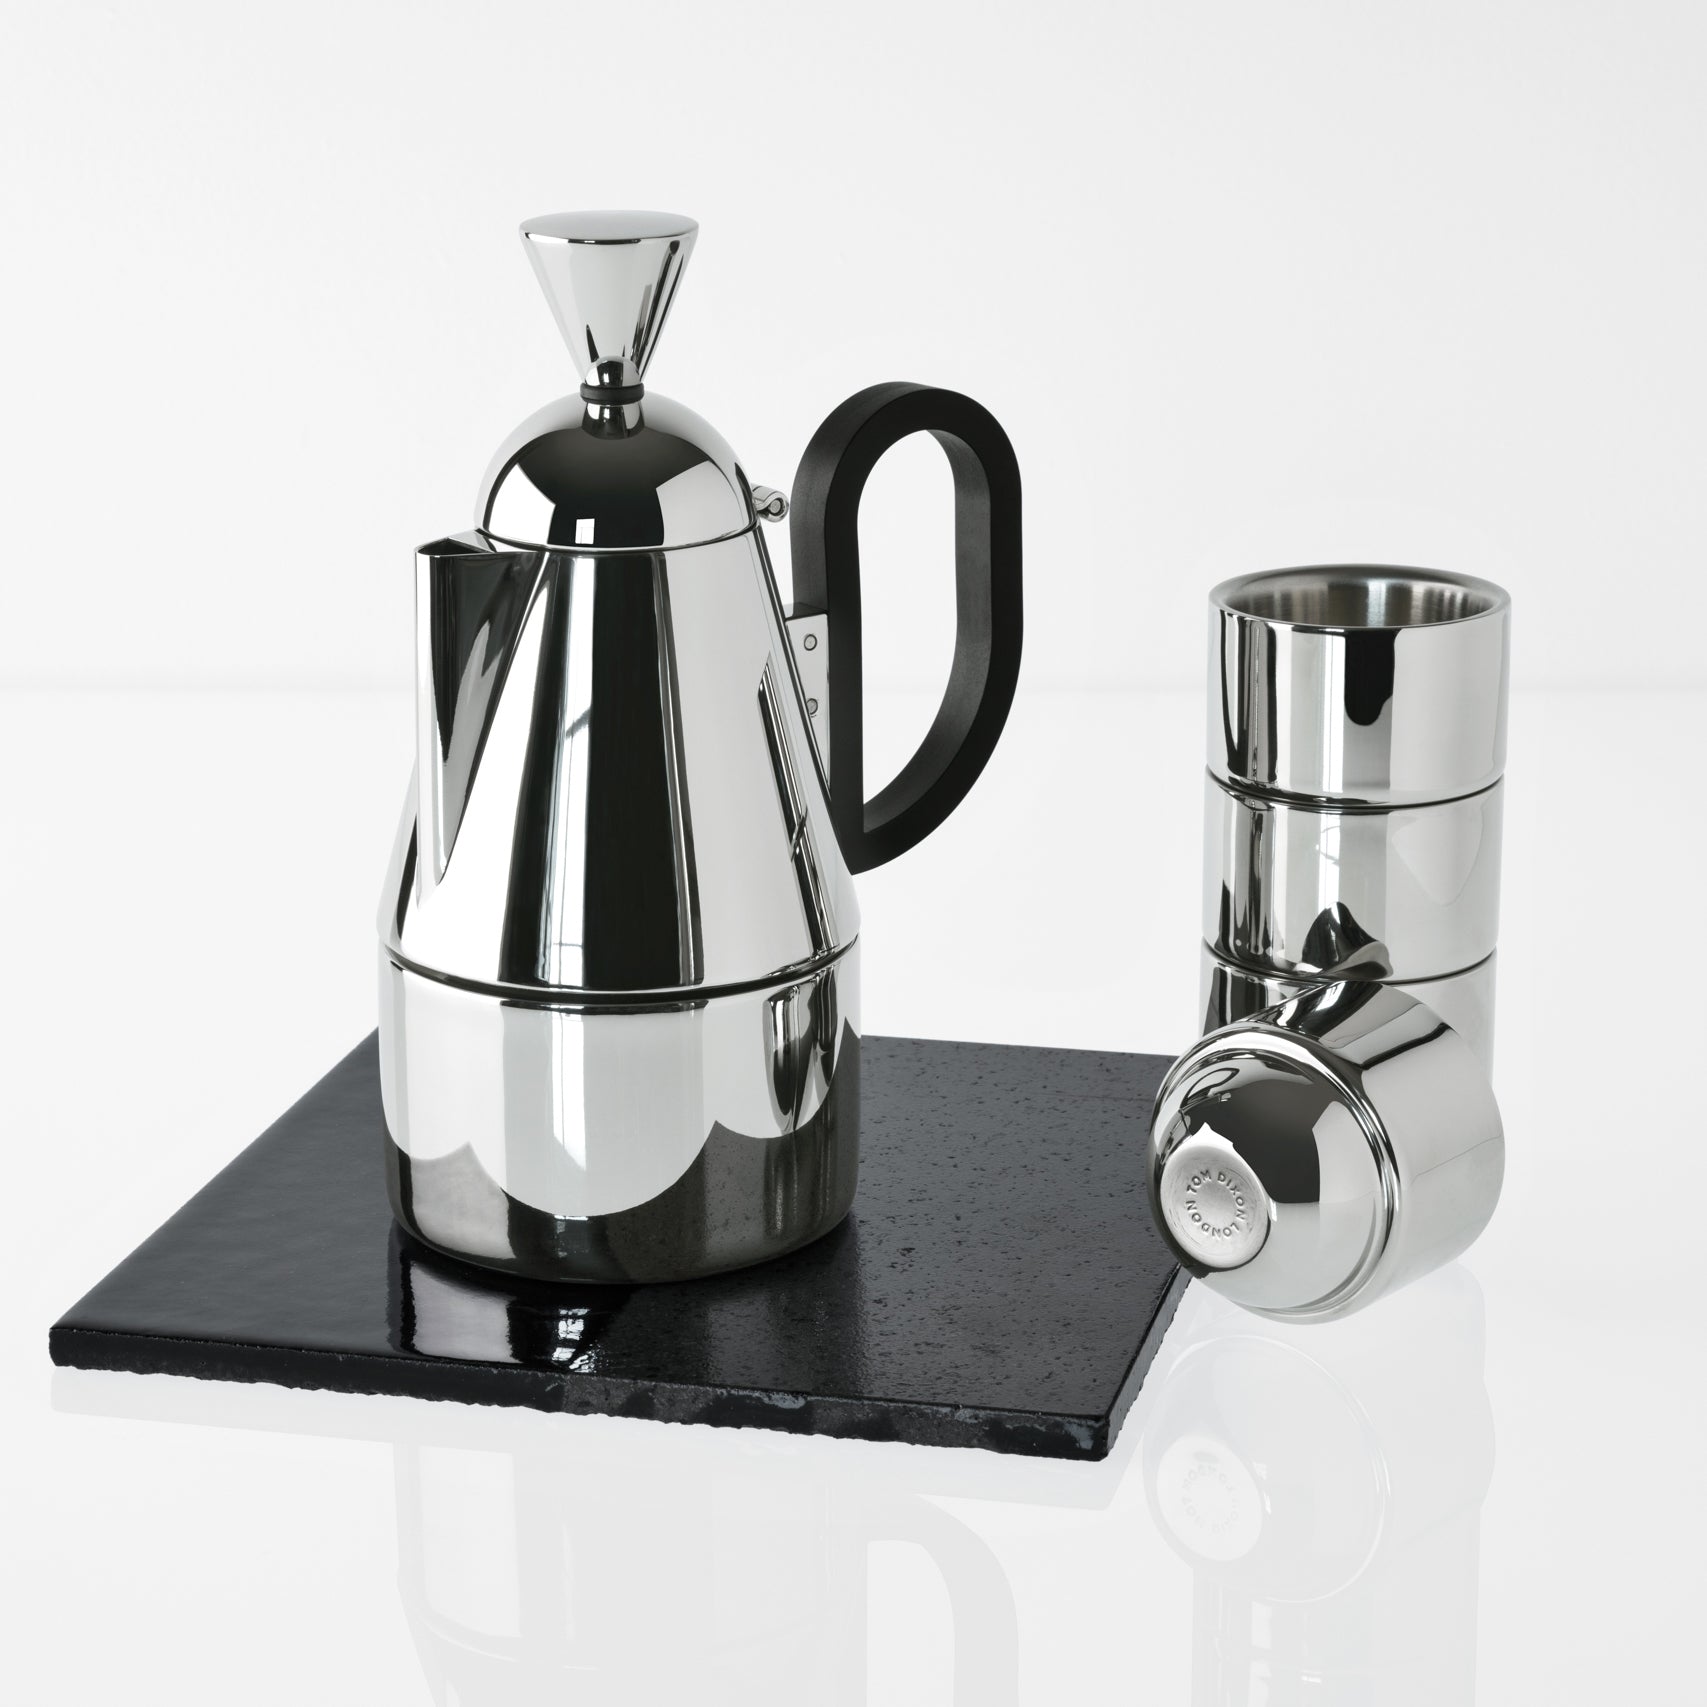 Brew Stove Top Espresso Maker: Stainless Steel